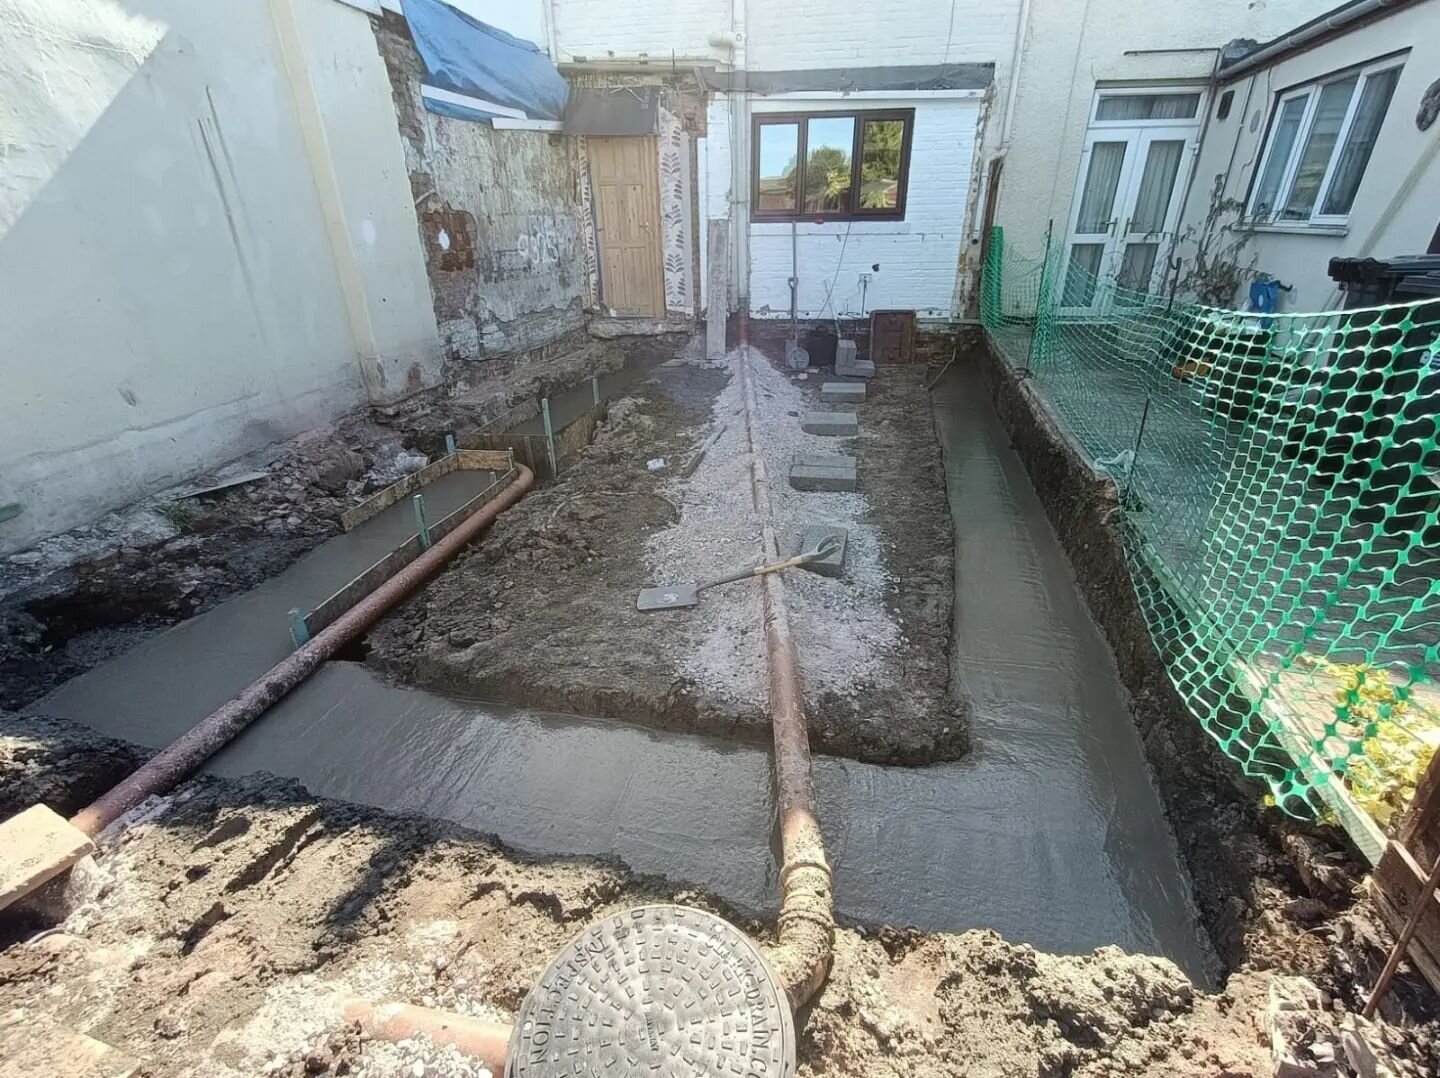 🟠 New project in Bridgwater 🟠

Works are well underway in Bridgwater where we have been asked to build a single storey rear extension 🧱 for a self contained living area.

Foundations have been dug and foundations laid ✅️
Now we will be working on 